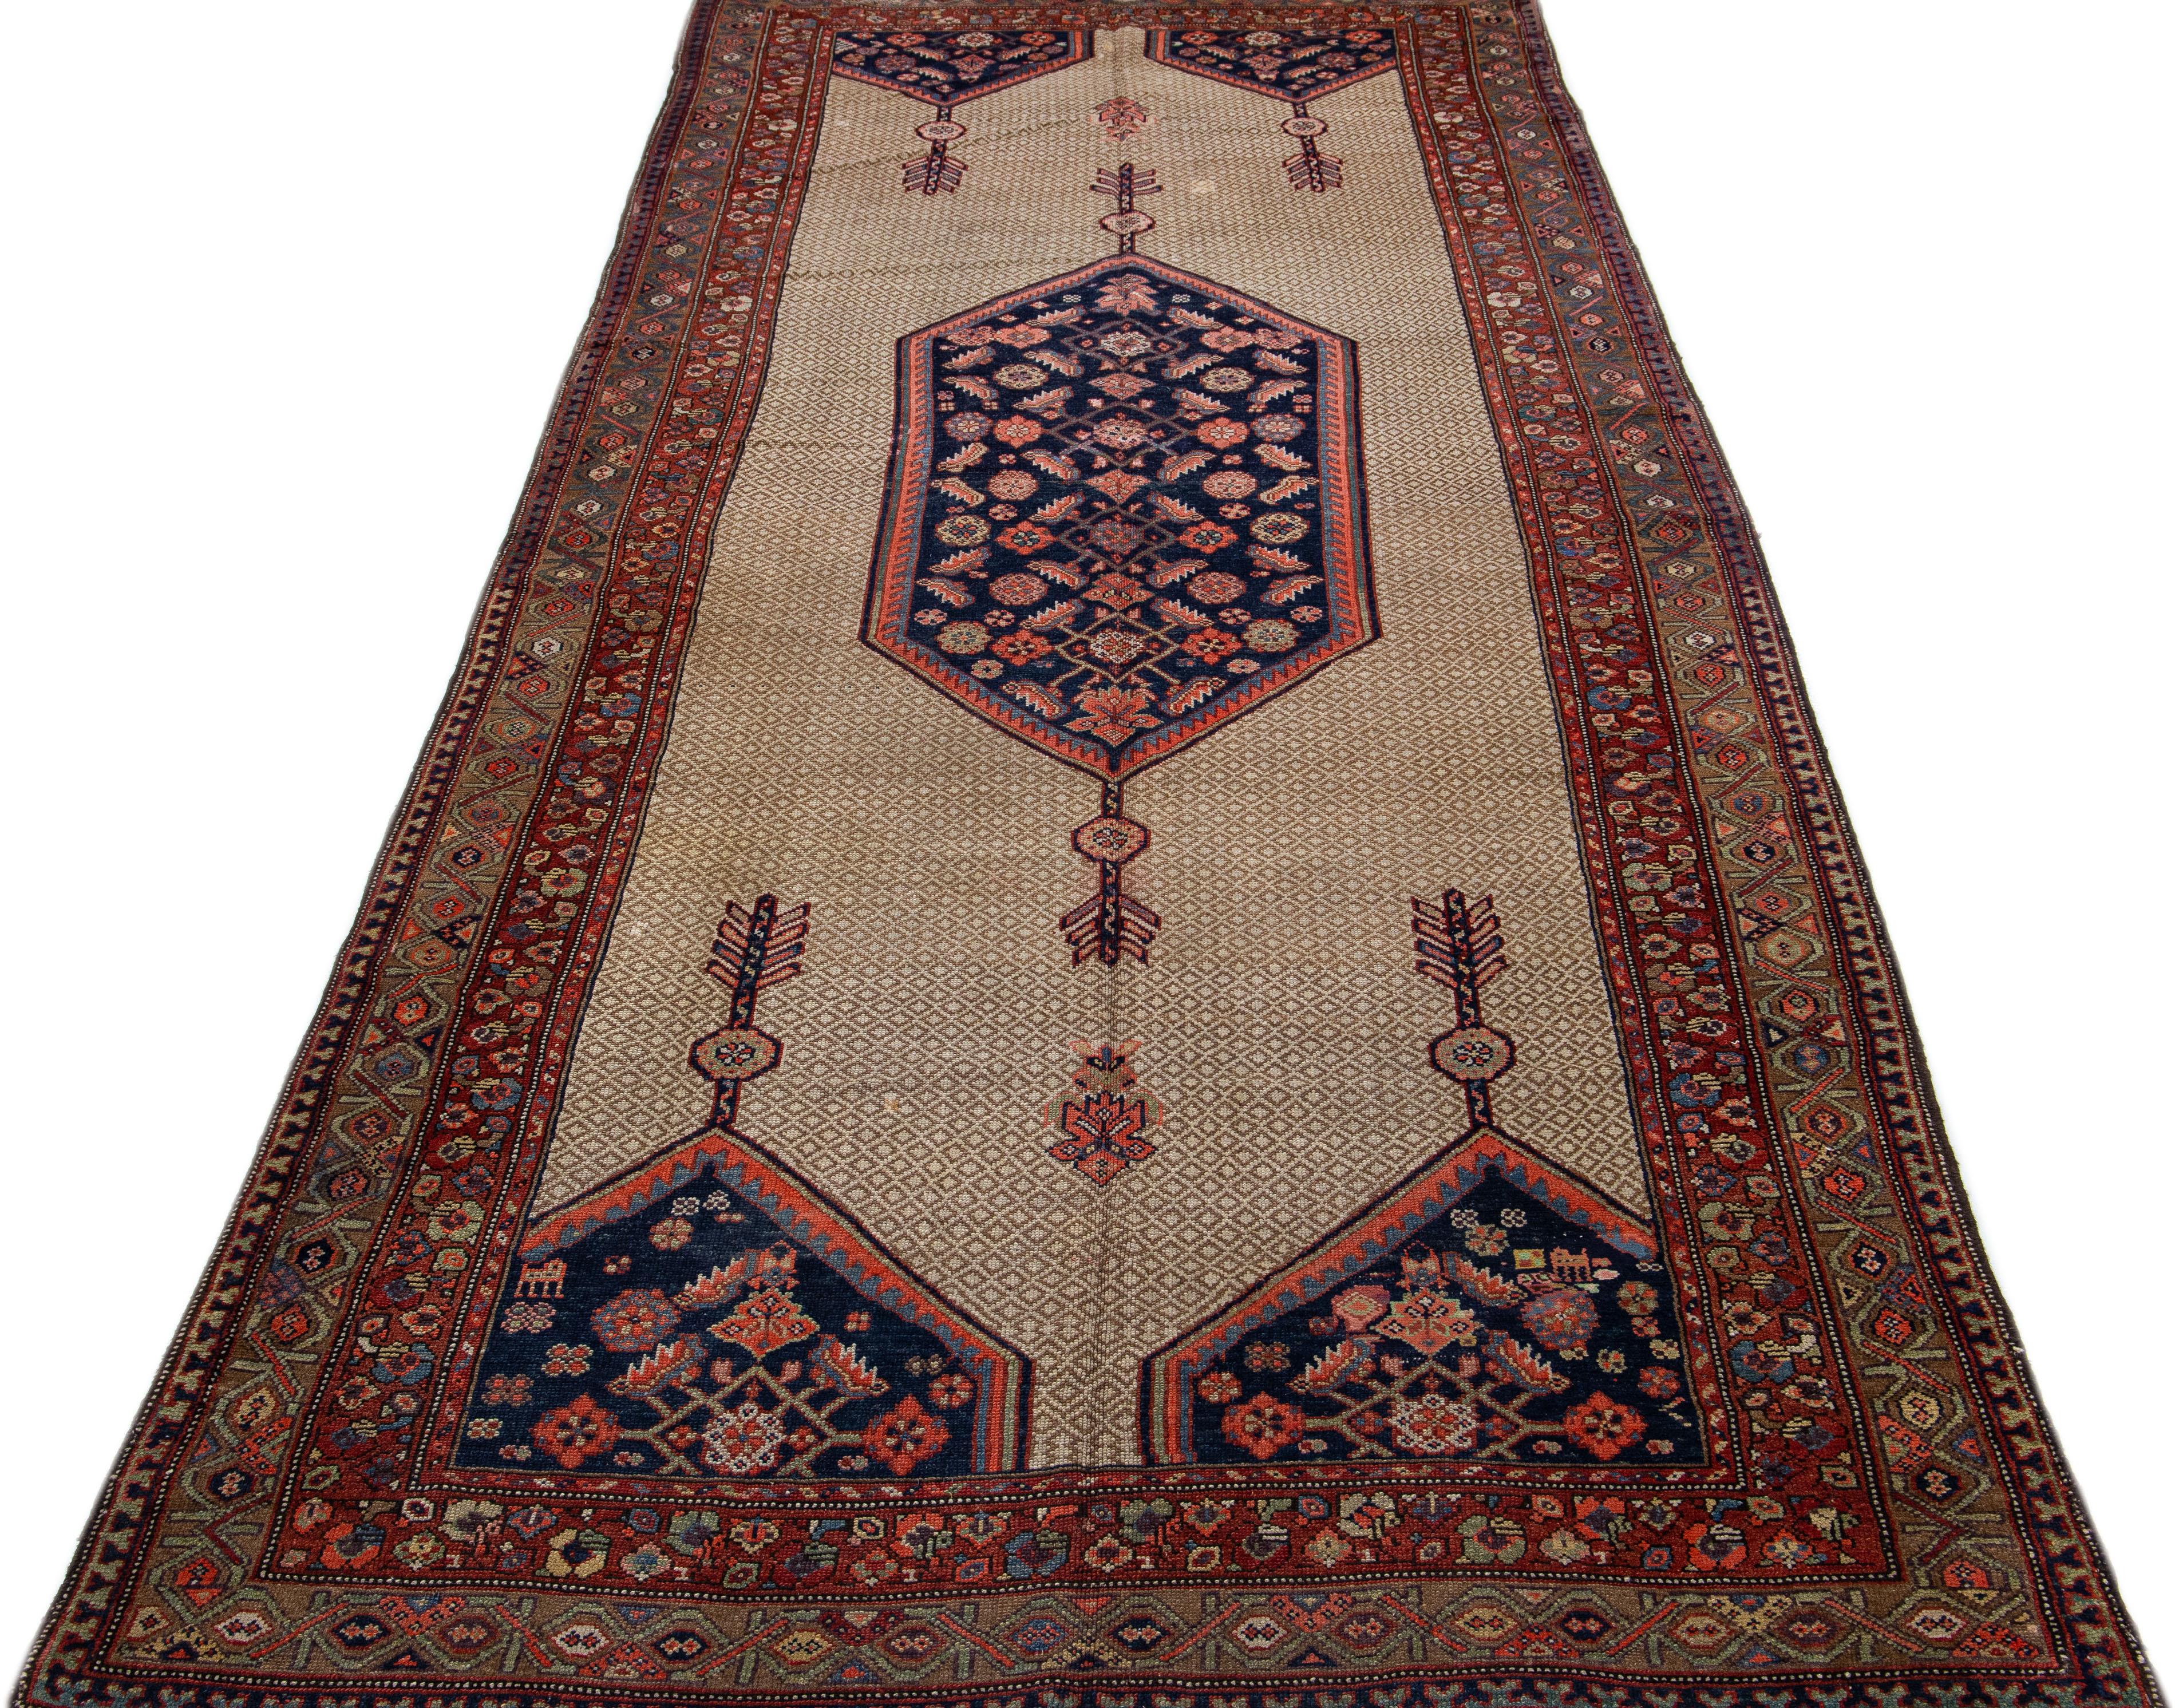 Beautiful antique Persian hand knotted wool rug with a beige color field. This piece has multicolor accents in a gorgeous blue medallion design.

This rug measures 5' 6' x 12' 9